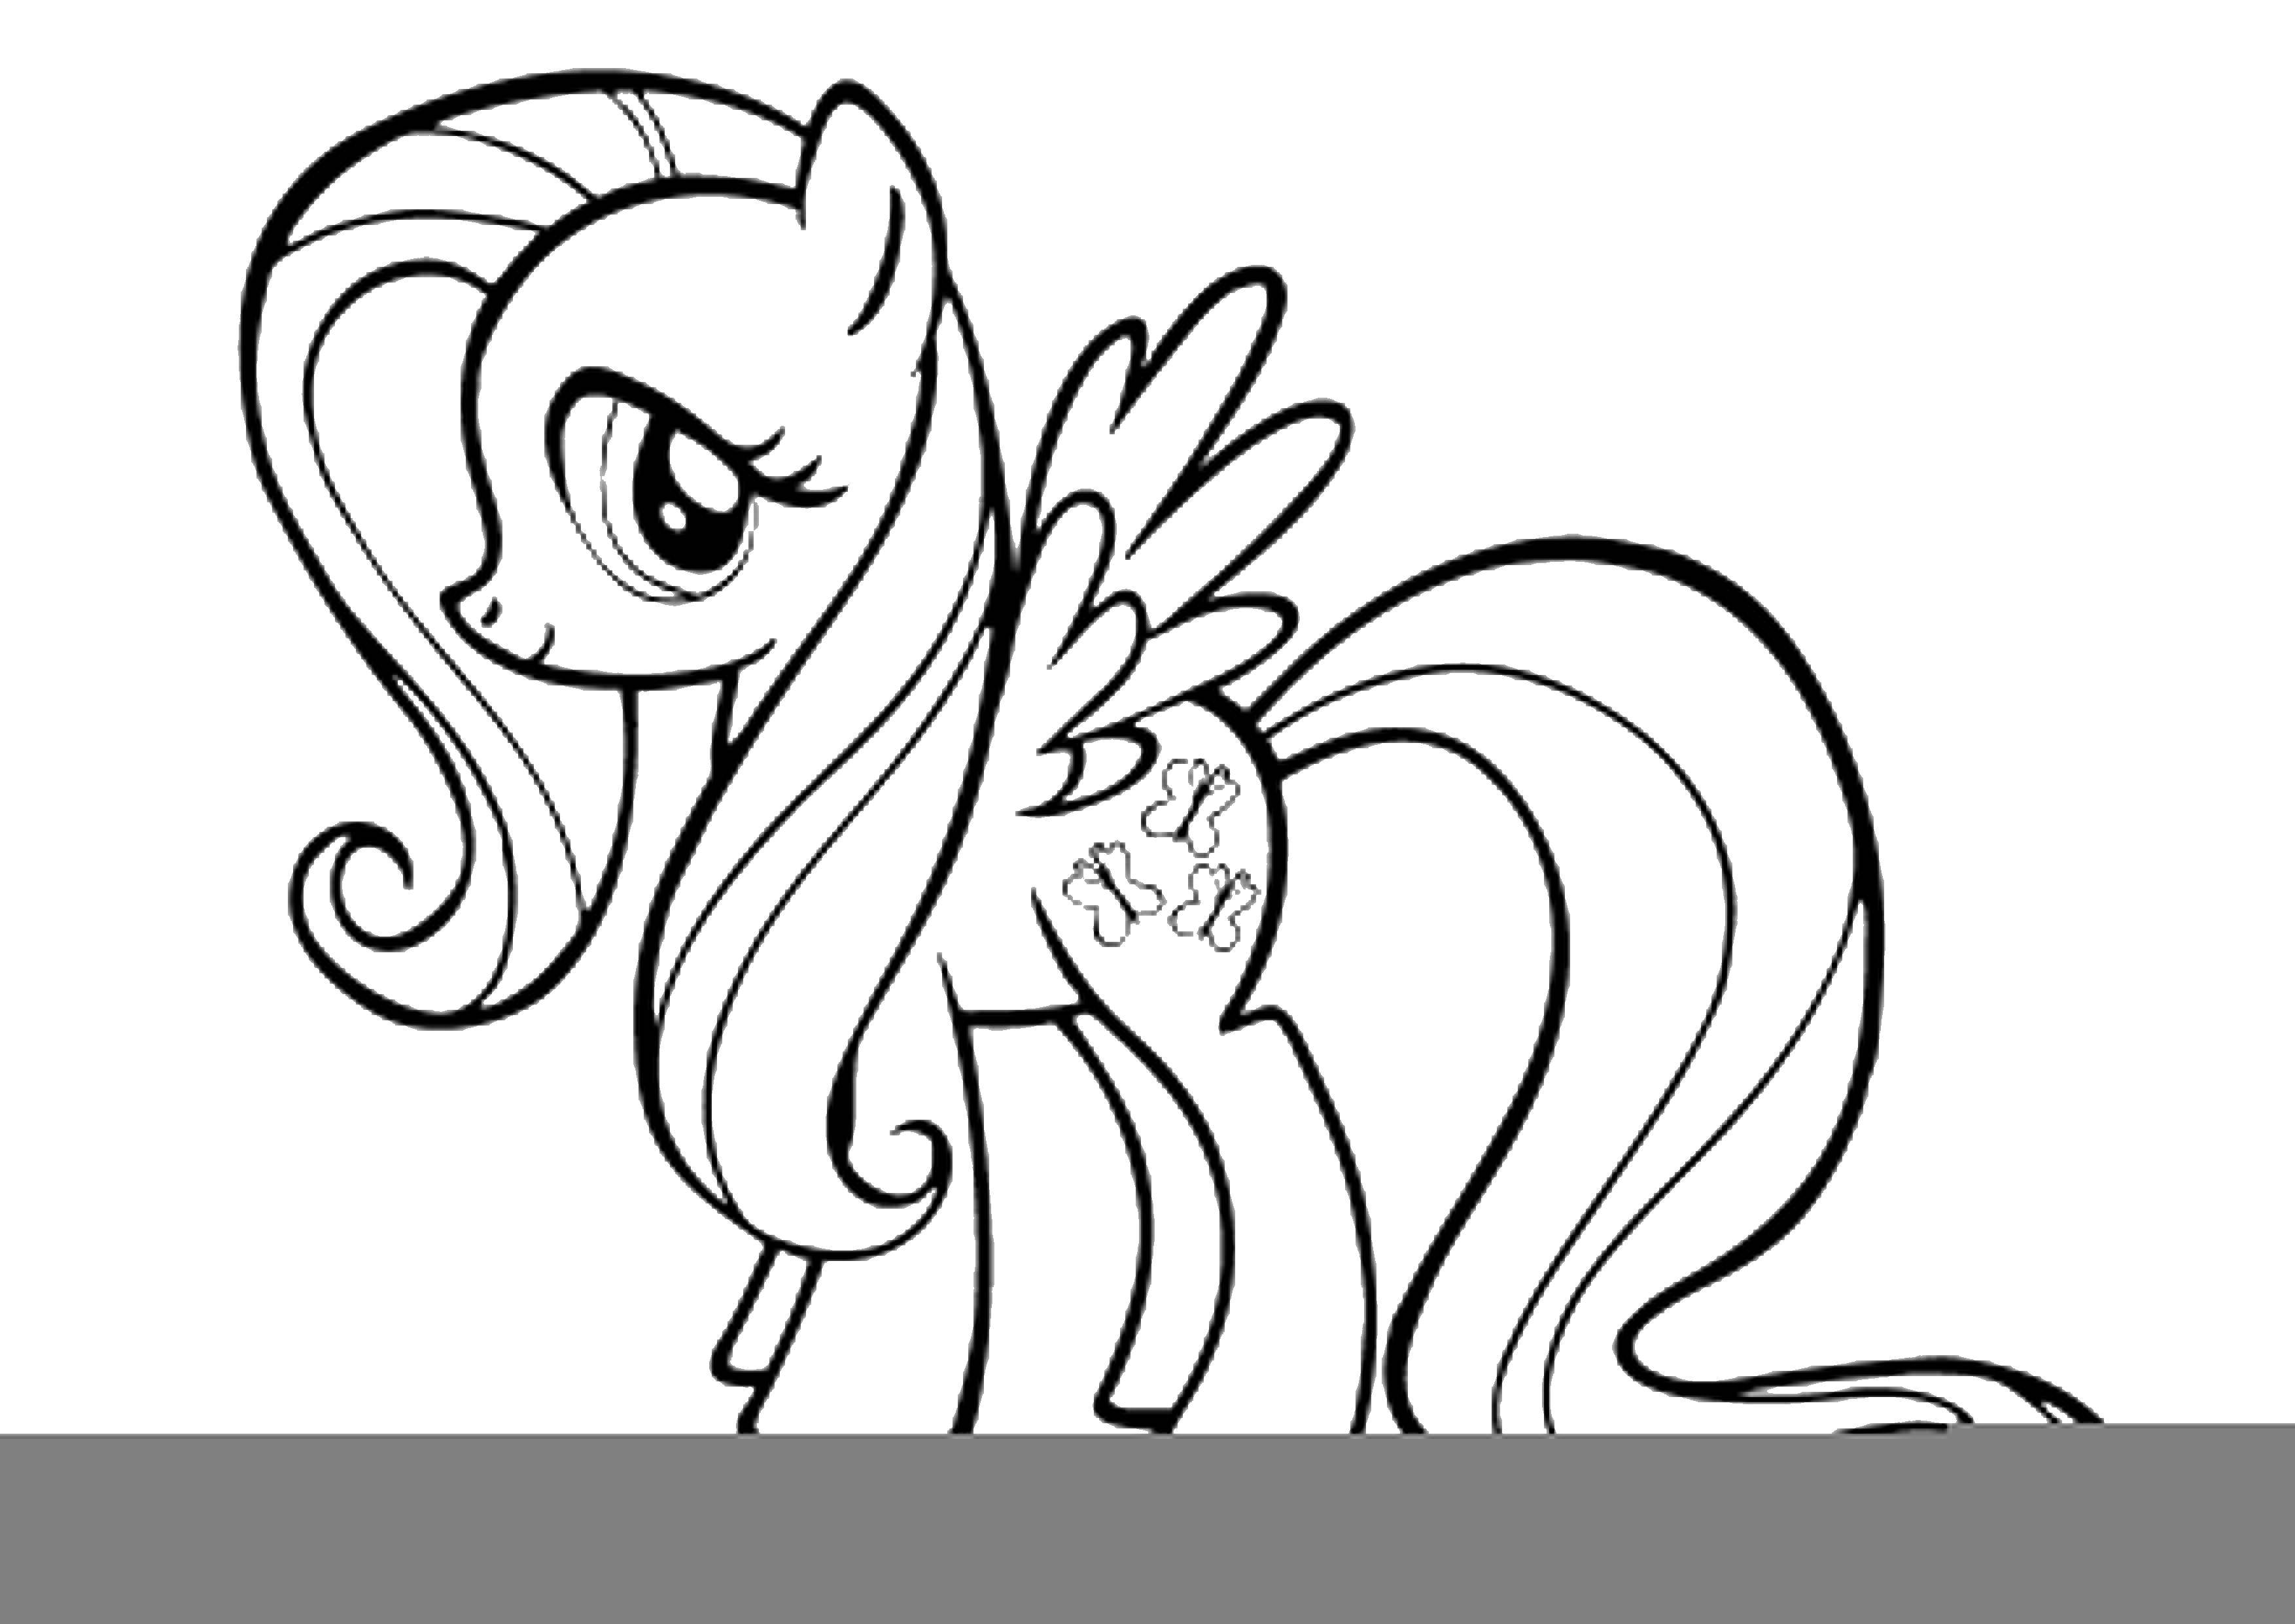 Coloring Winged ponies. Category my little pony. Tags:  ponies, butterflies, wings, tail.